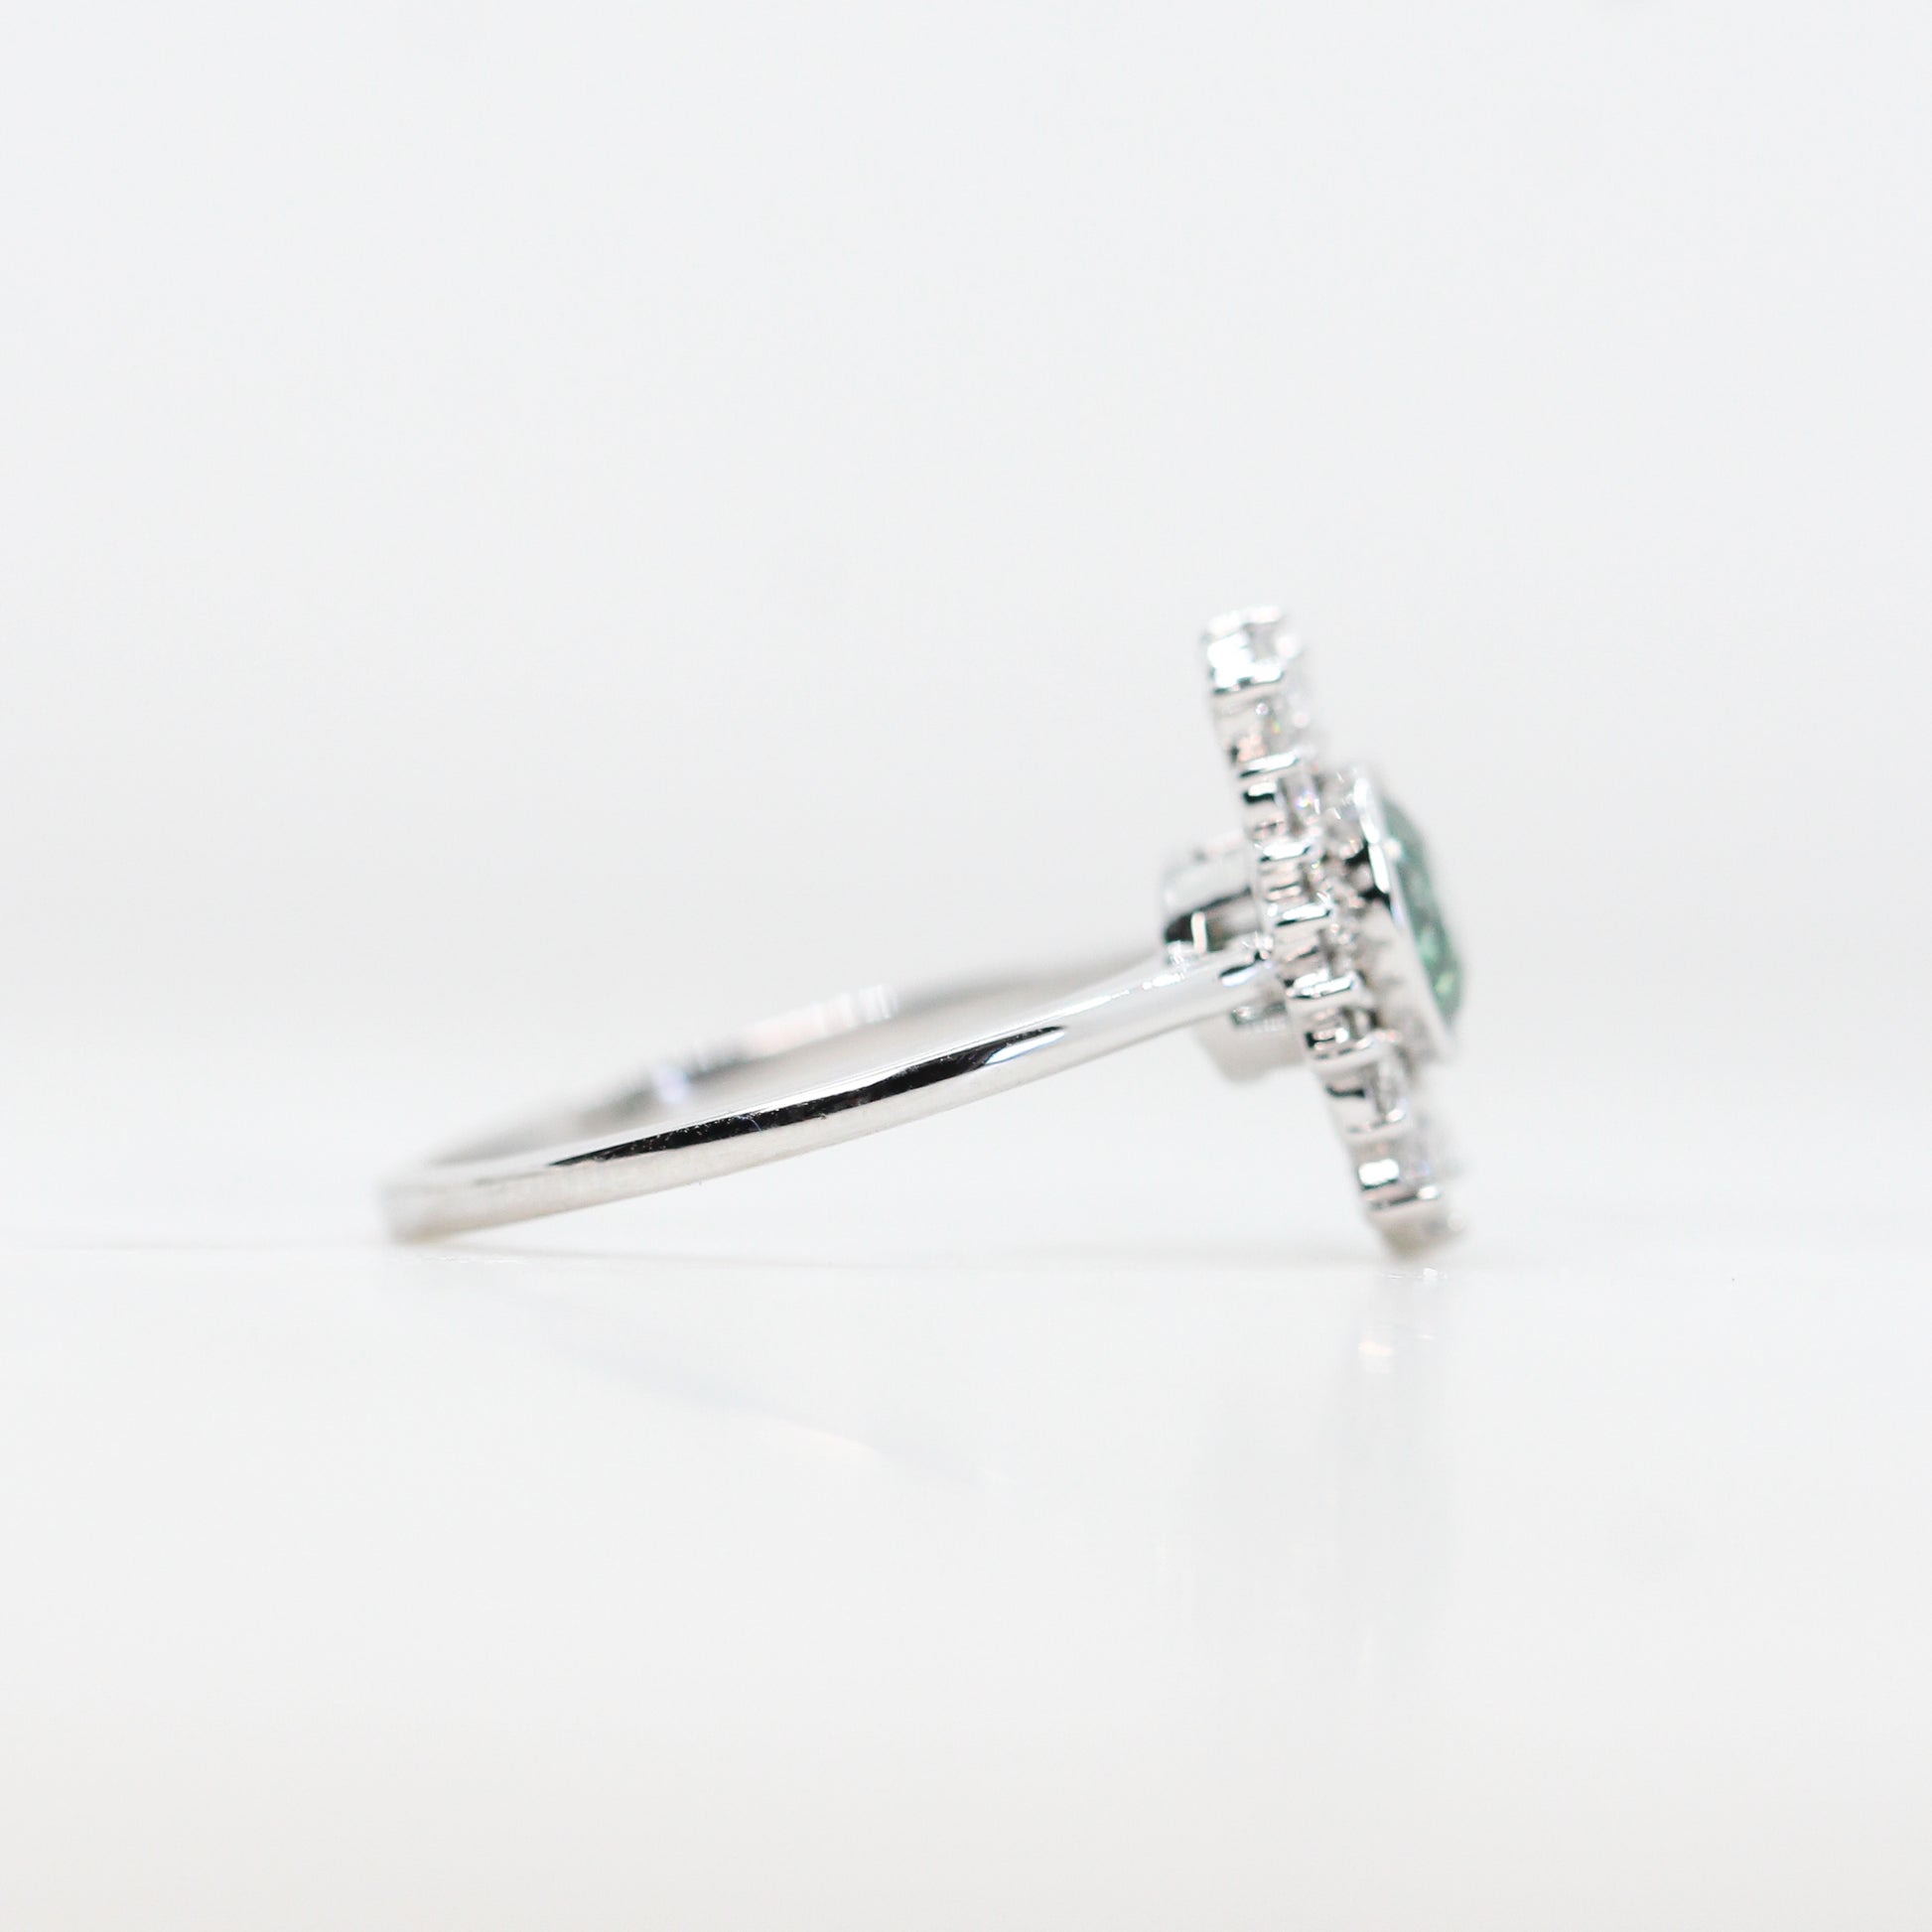 Juliette Ring with a 0.83 Carat Green Celestial Diamond and White Accent Diamonds in 14k White Gold - Ready to Size and Ship - Midwinter Co. Alternative Bridal Rings and Modern Fine Jewelry